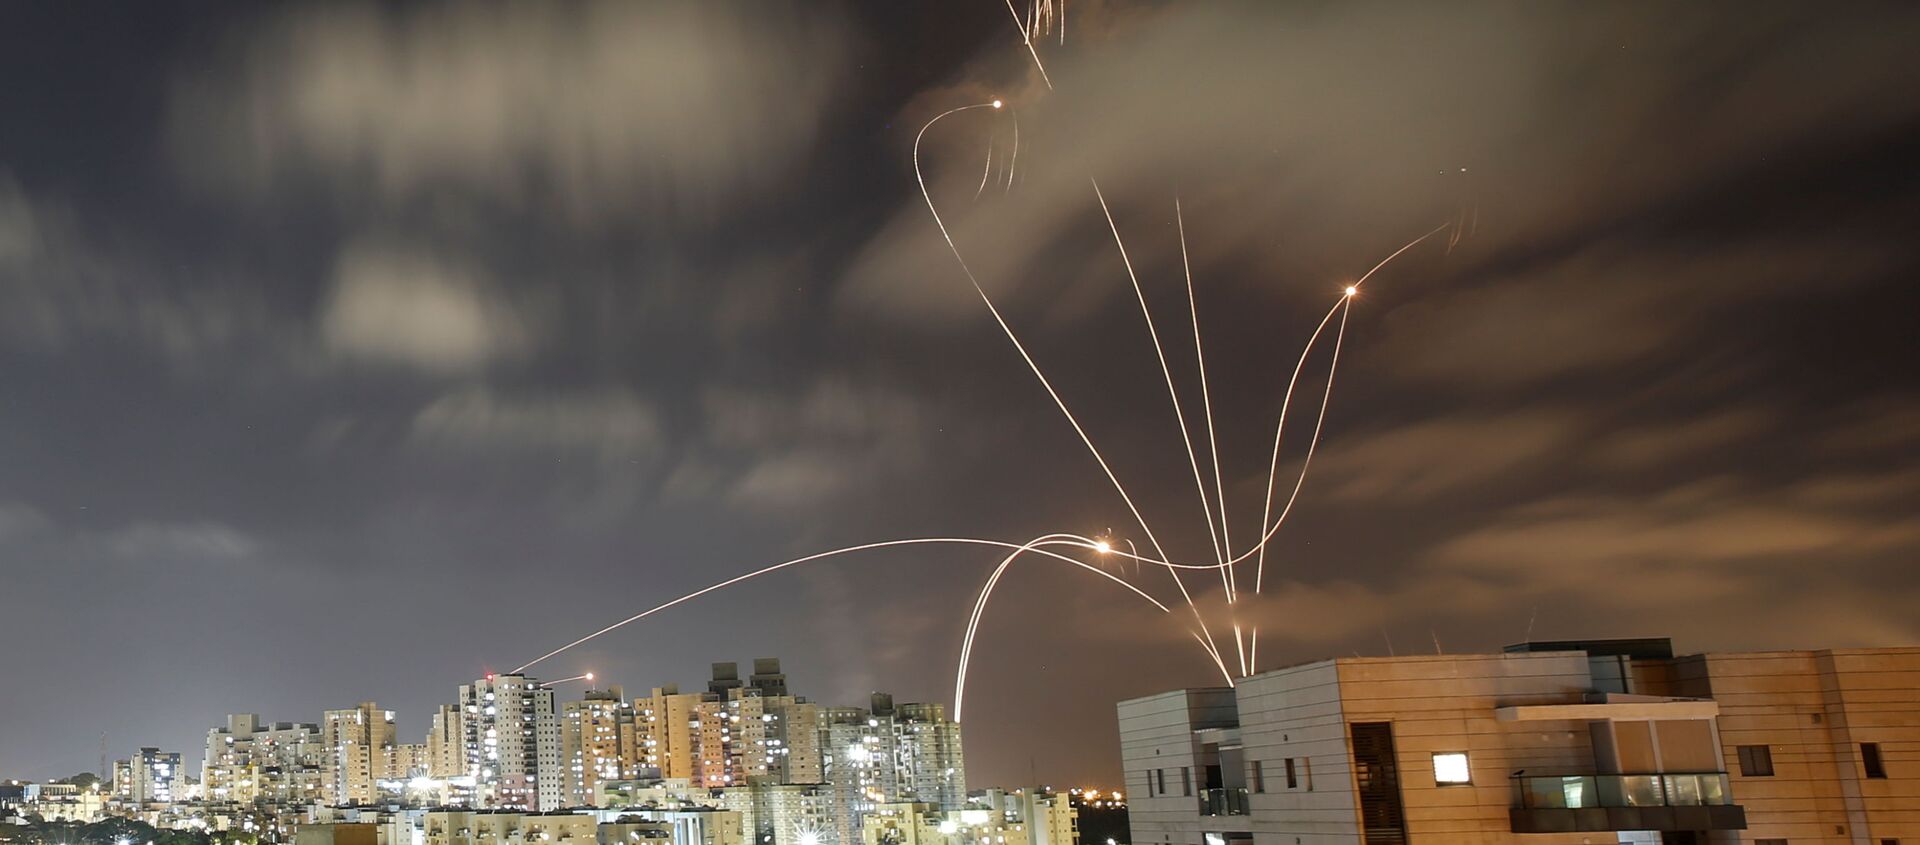 Streaks of light are seen as Israel's Iron Dome anti-missile system intercepts rockets launched from the Gaza Strip towards Israel, as seen from Ashkelon, Israel May 12, 2021. - Sputnik International, 1920, 12.05.2021